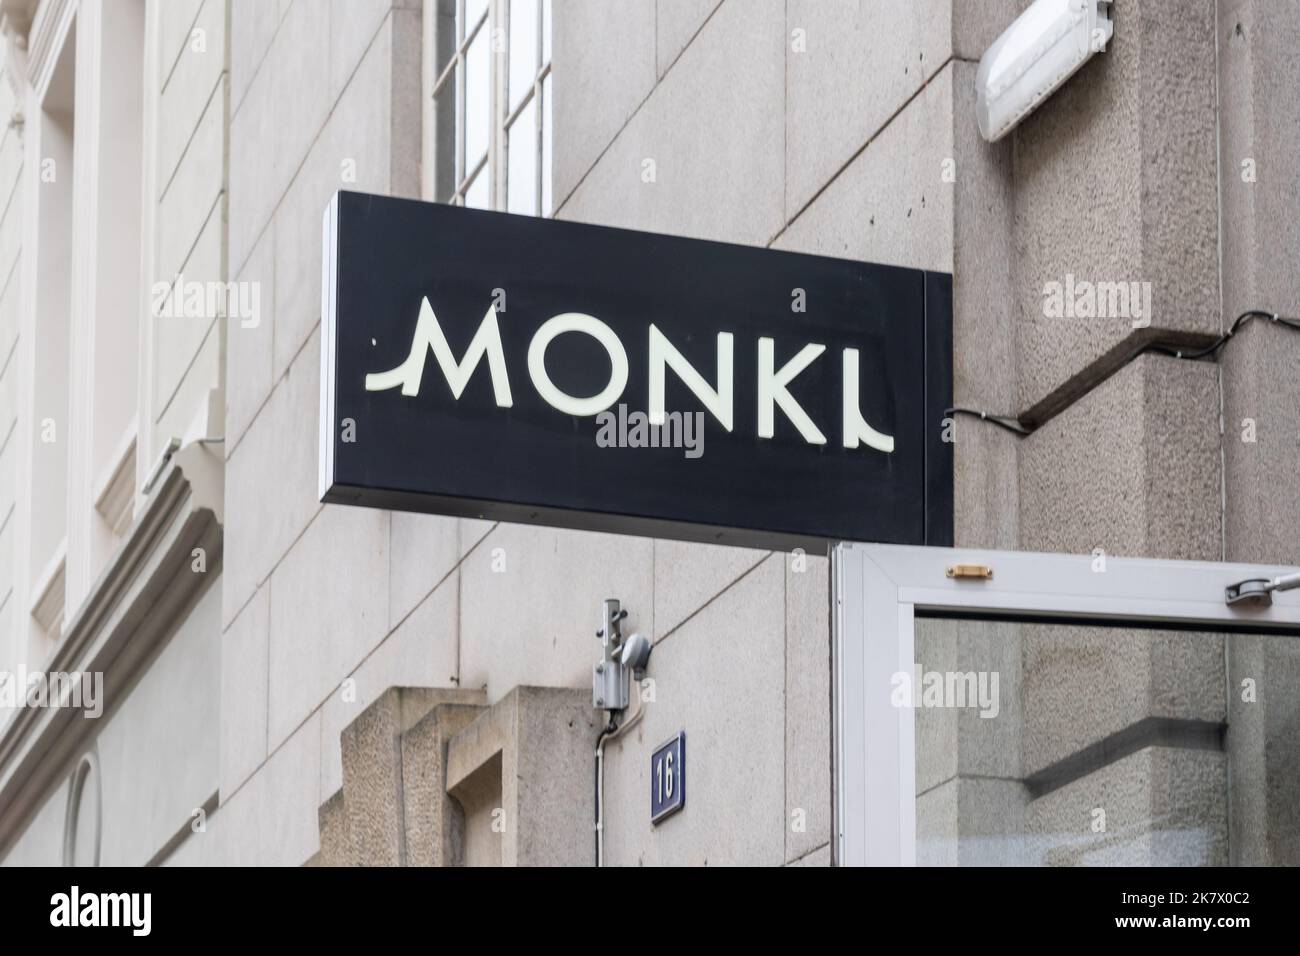 Oslo, Norway - October 15, 2022: Monki store projecting sign on the building. Stock Photo